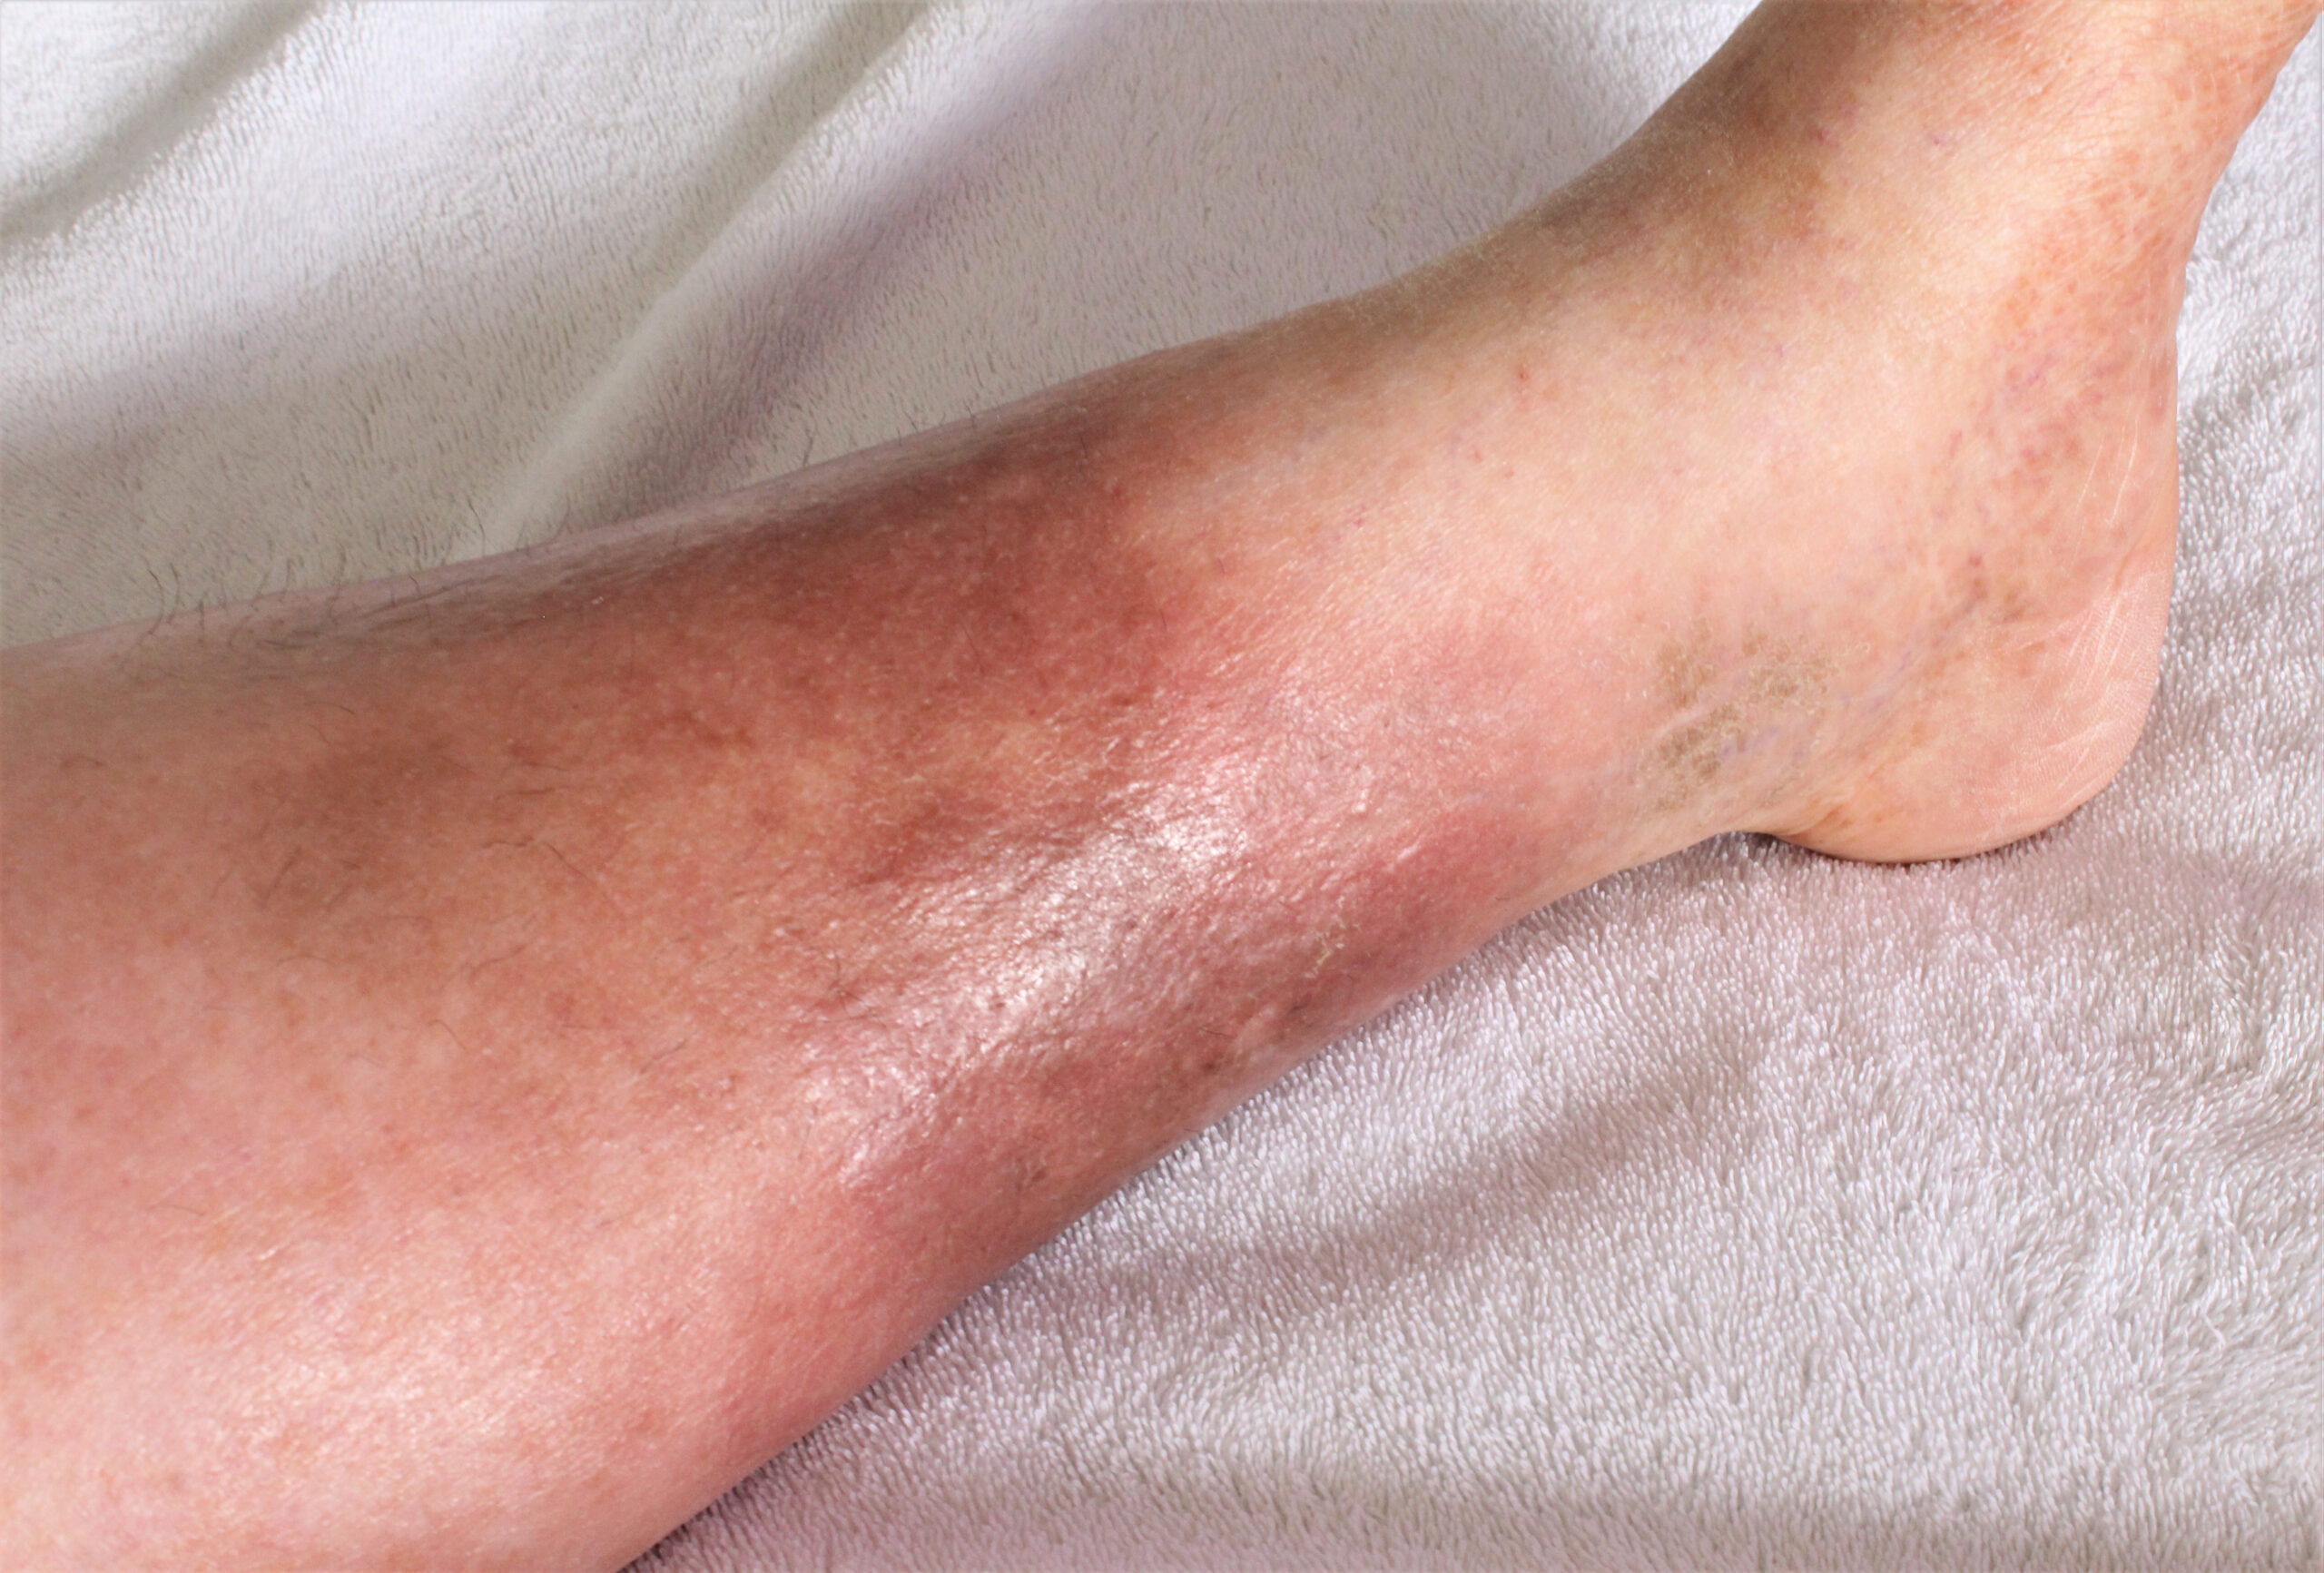 A close-up of the potential results of untreated heaviness in legs, an elderly man's lower leg bruised and swollen.